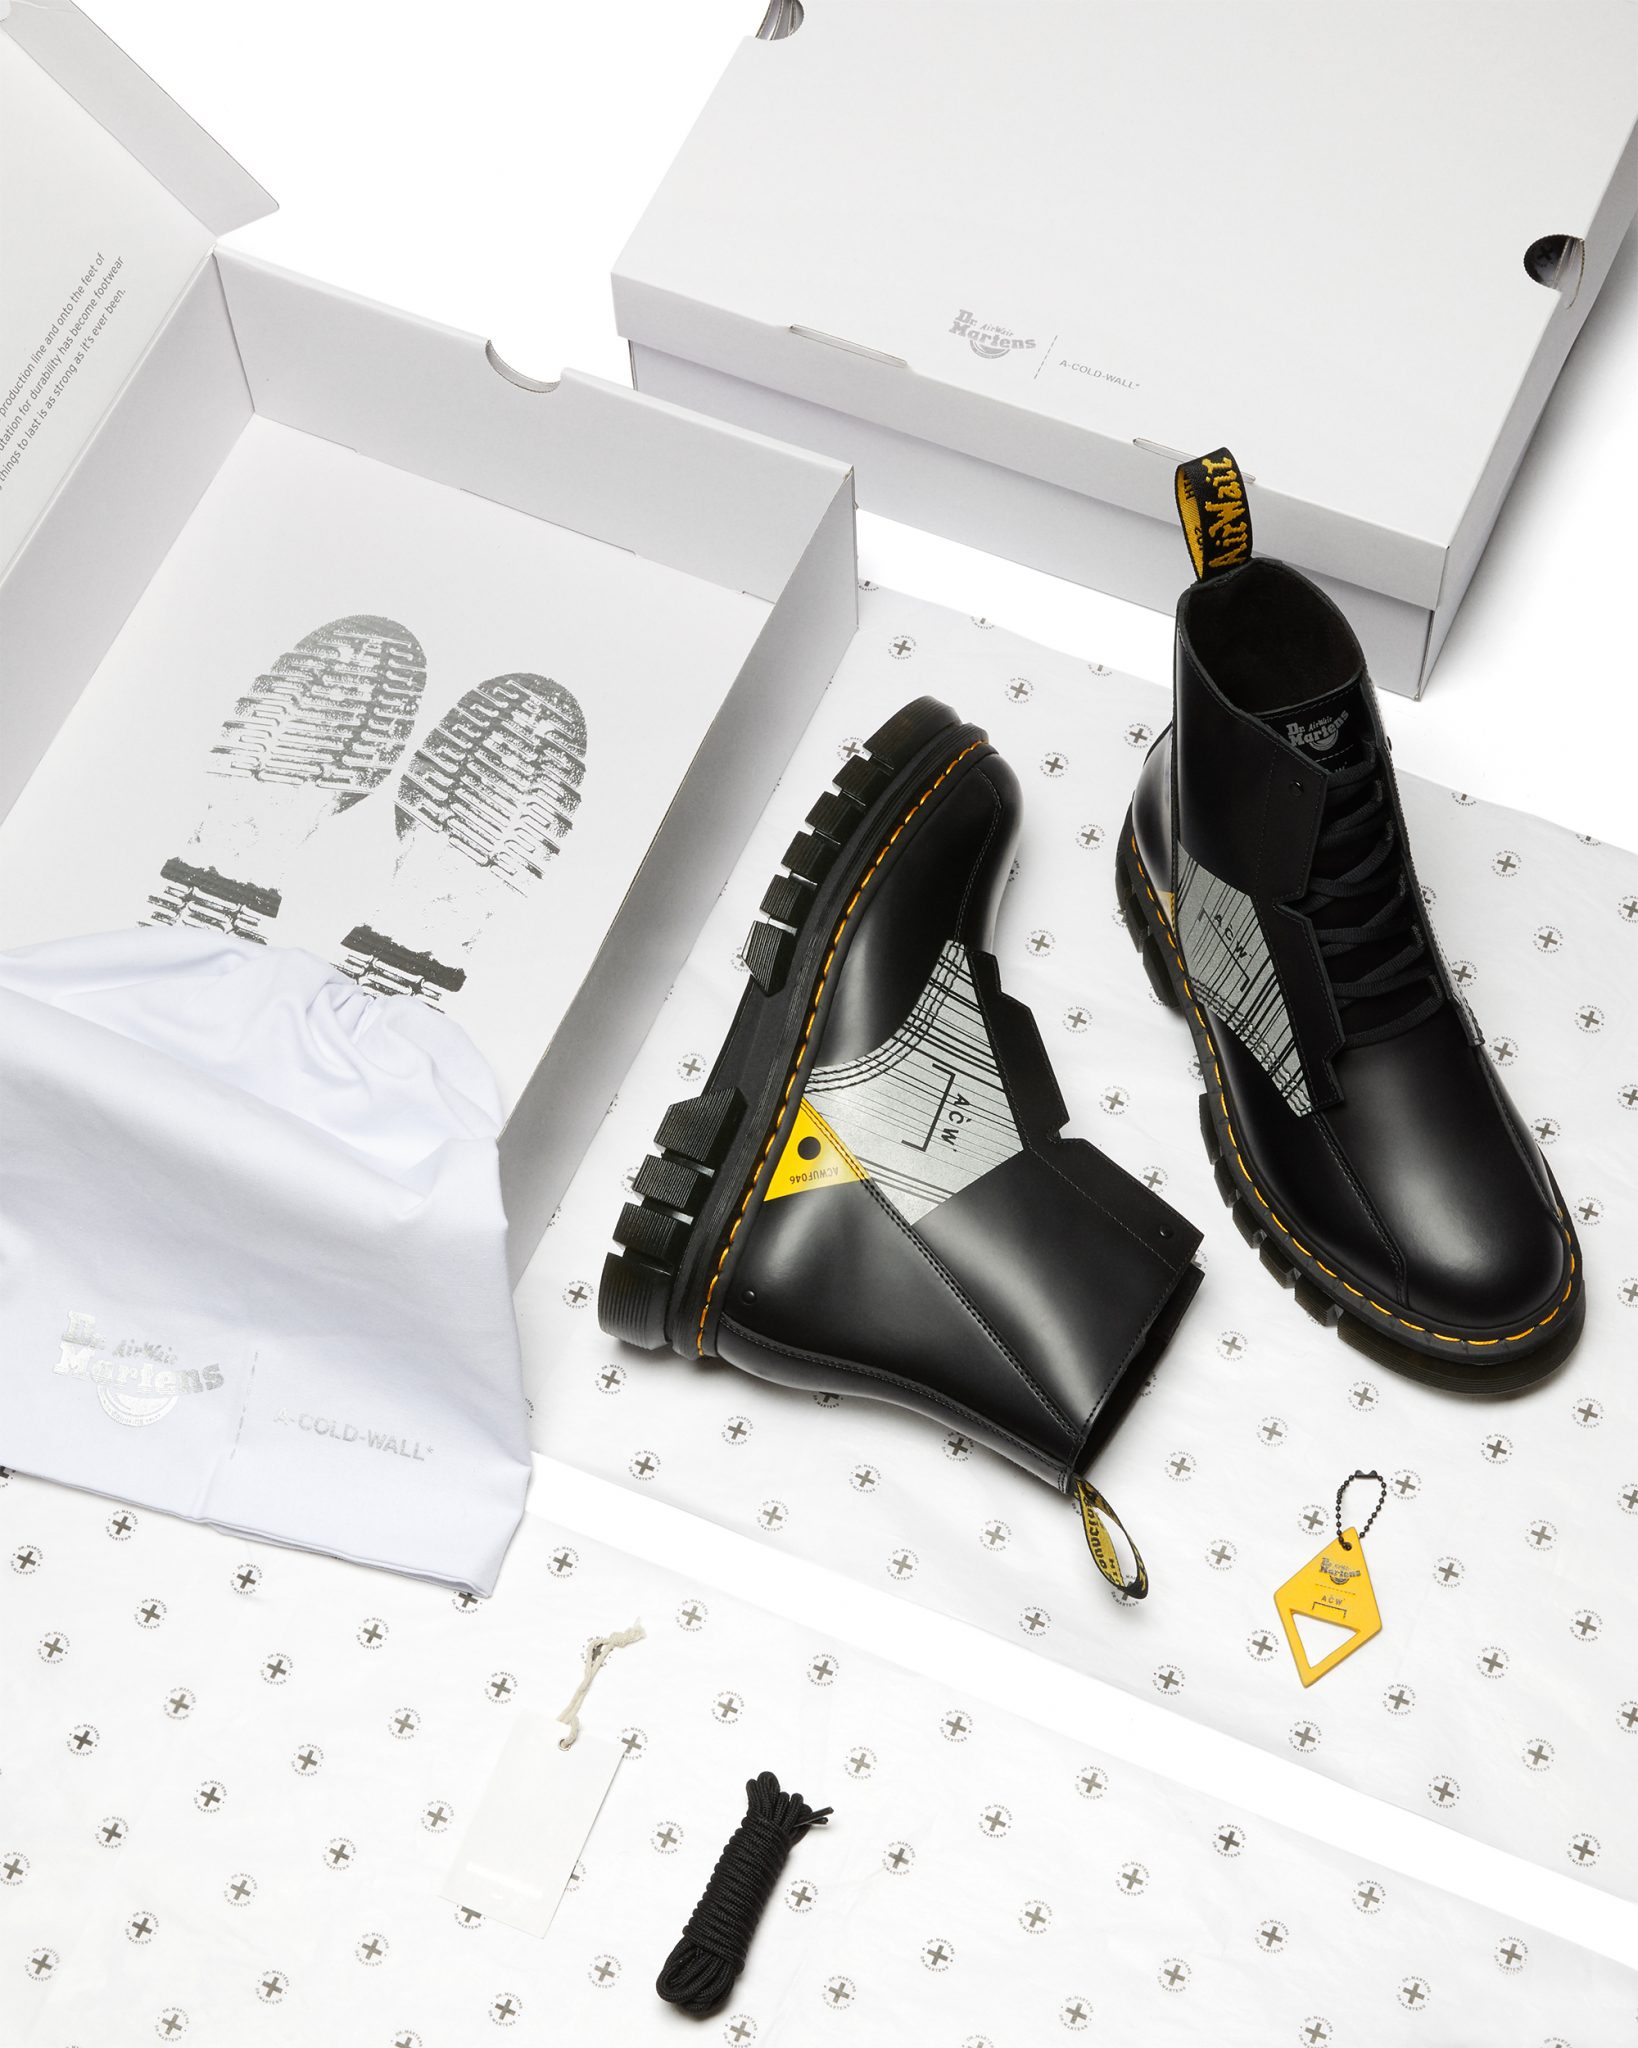 Dr. Martens Collaborates with A-COLD-WALL